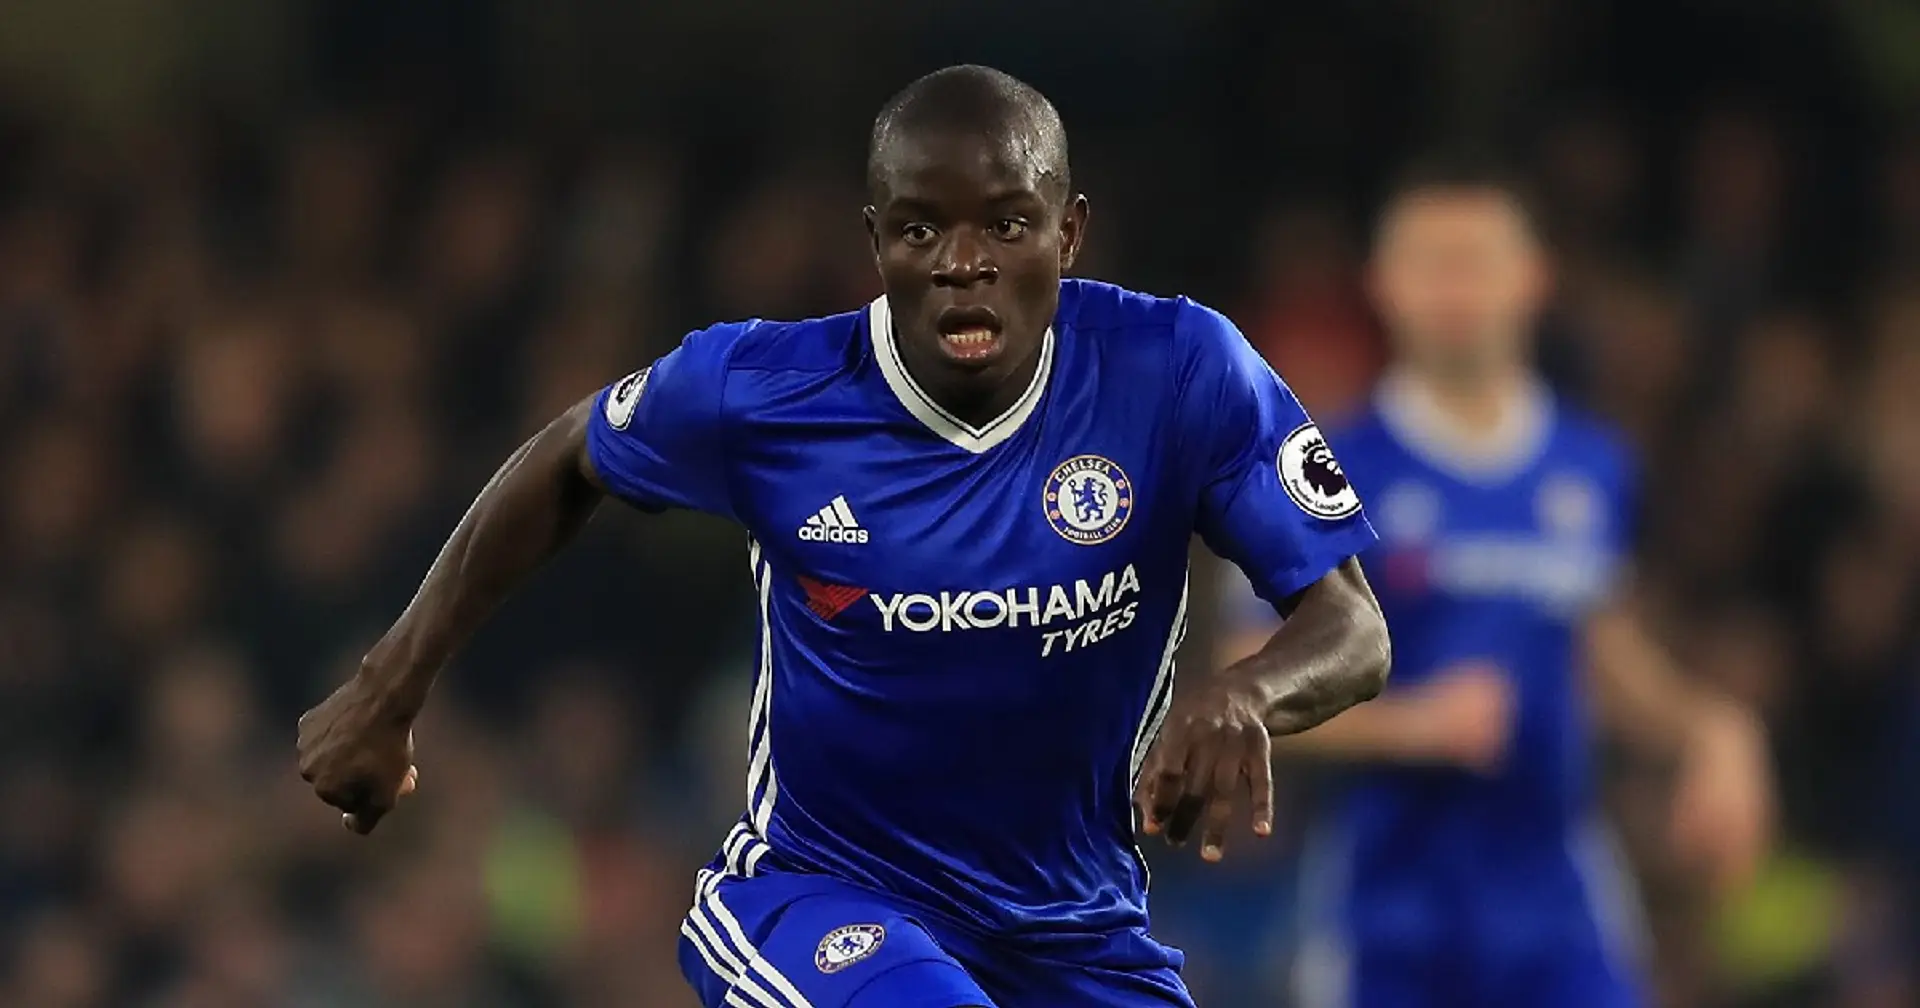 'The next Makelele', 'One-season wonder?': How Chelsea fans reacted to Kante's signing in 2016